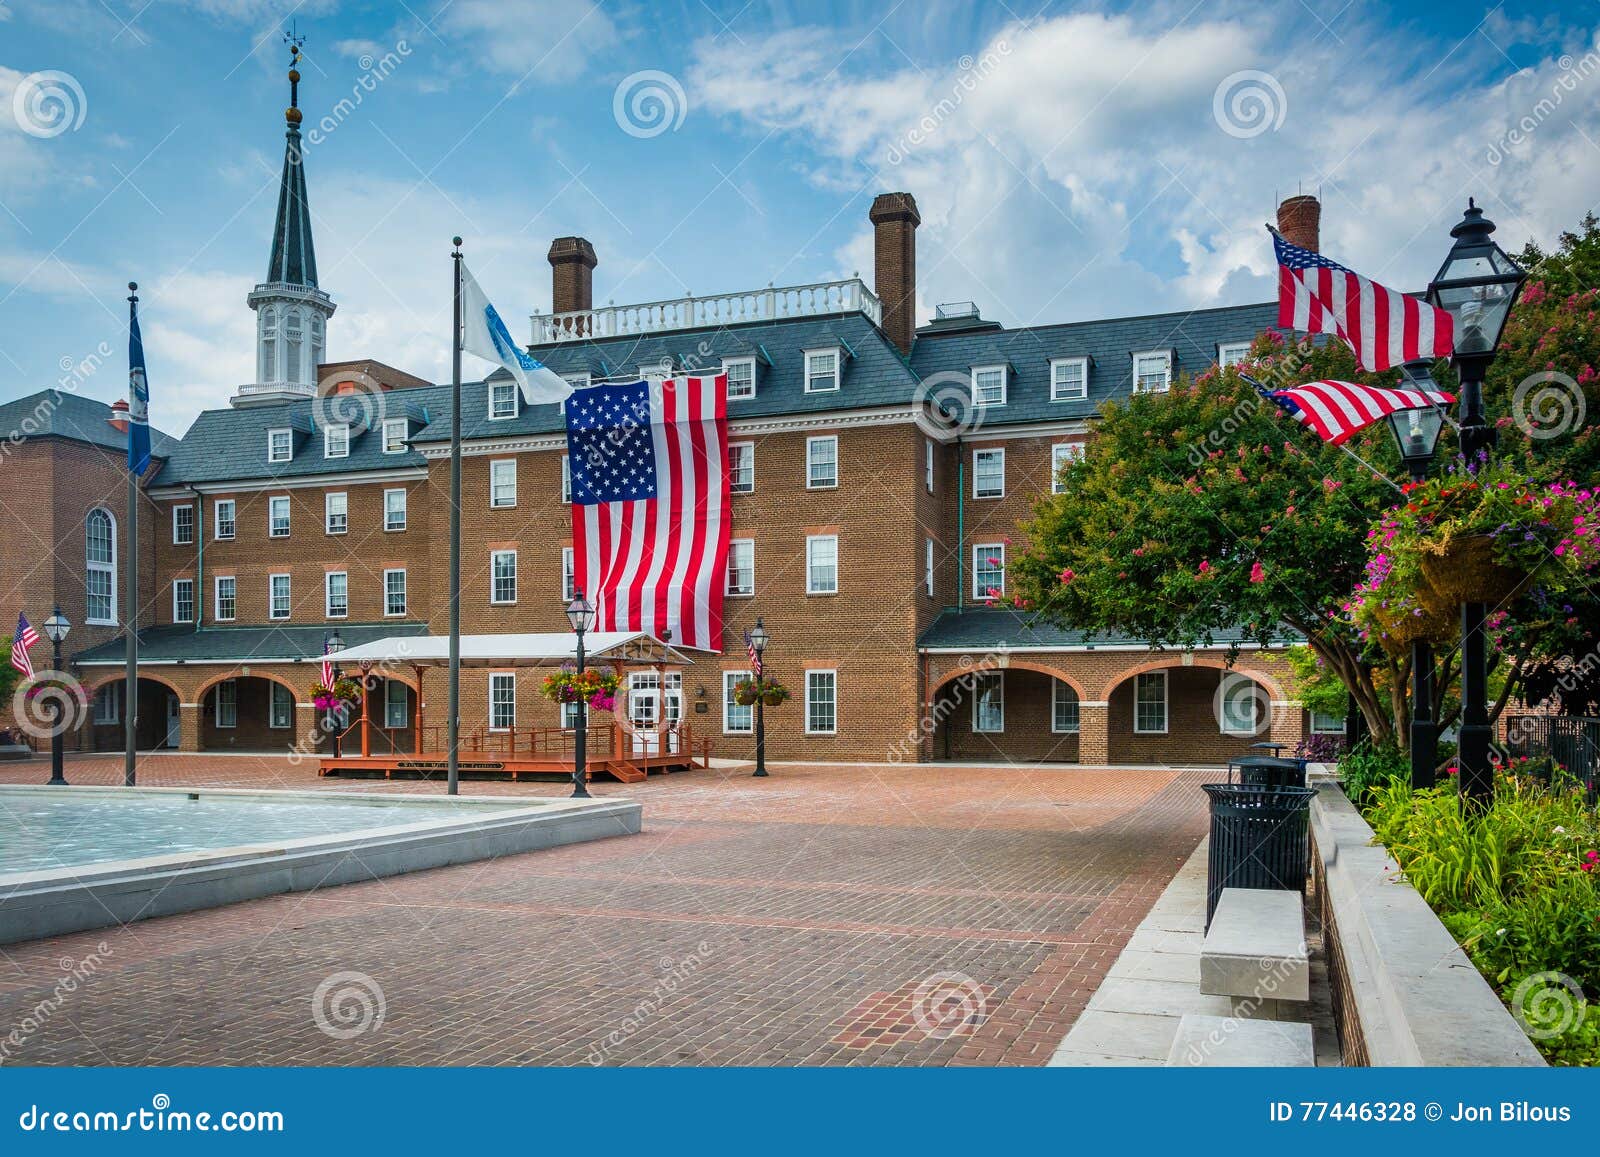 market square and city hall, in old town, alexandria, virginia.